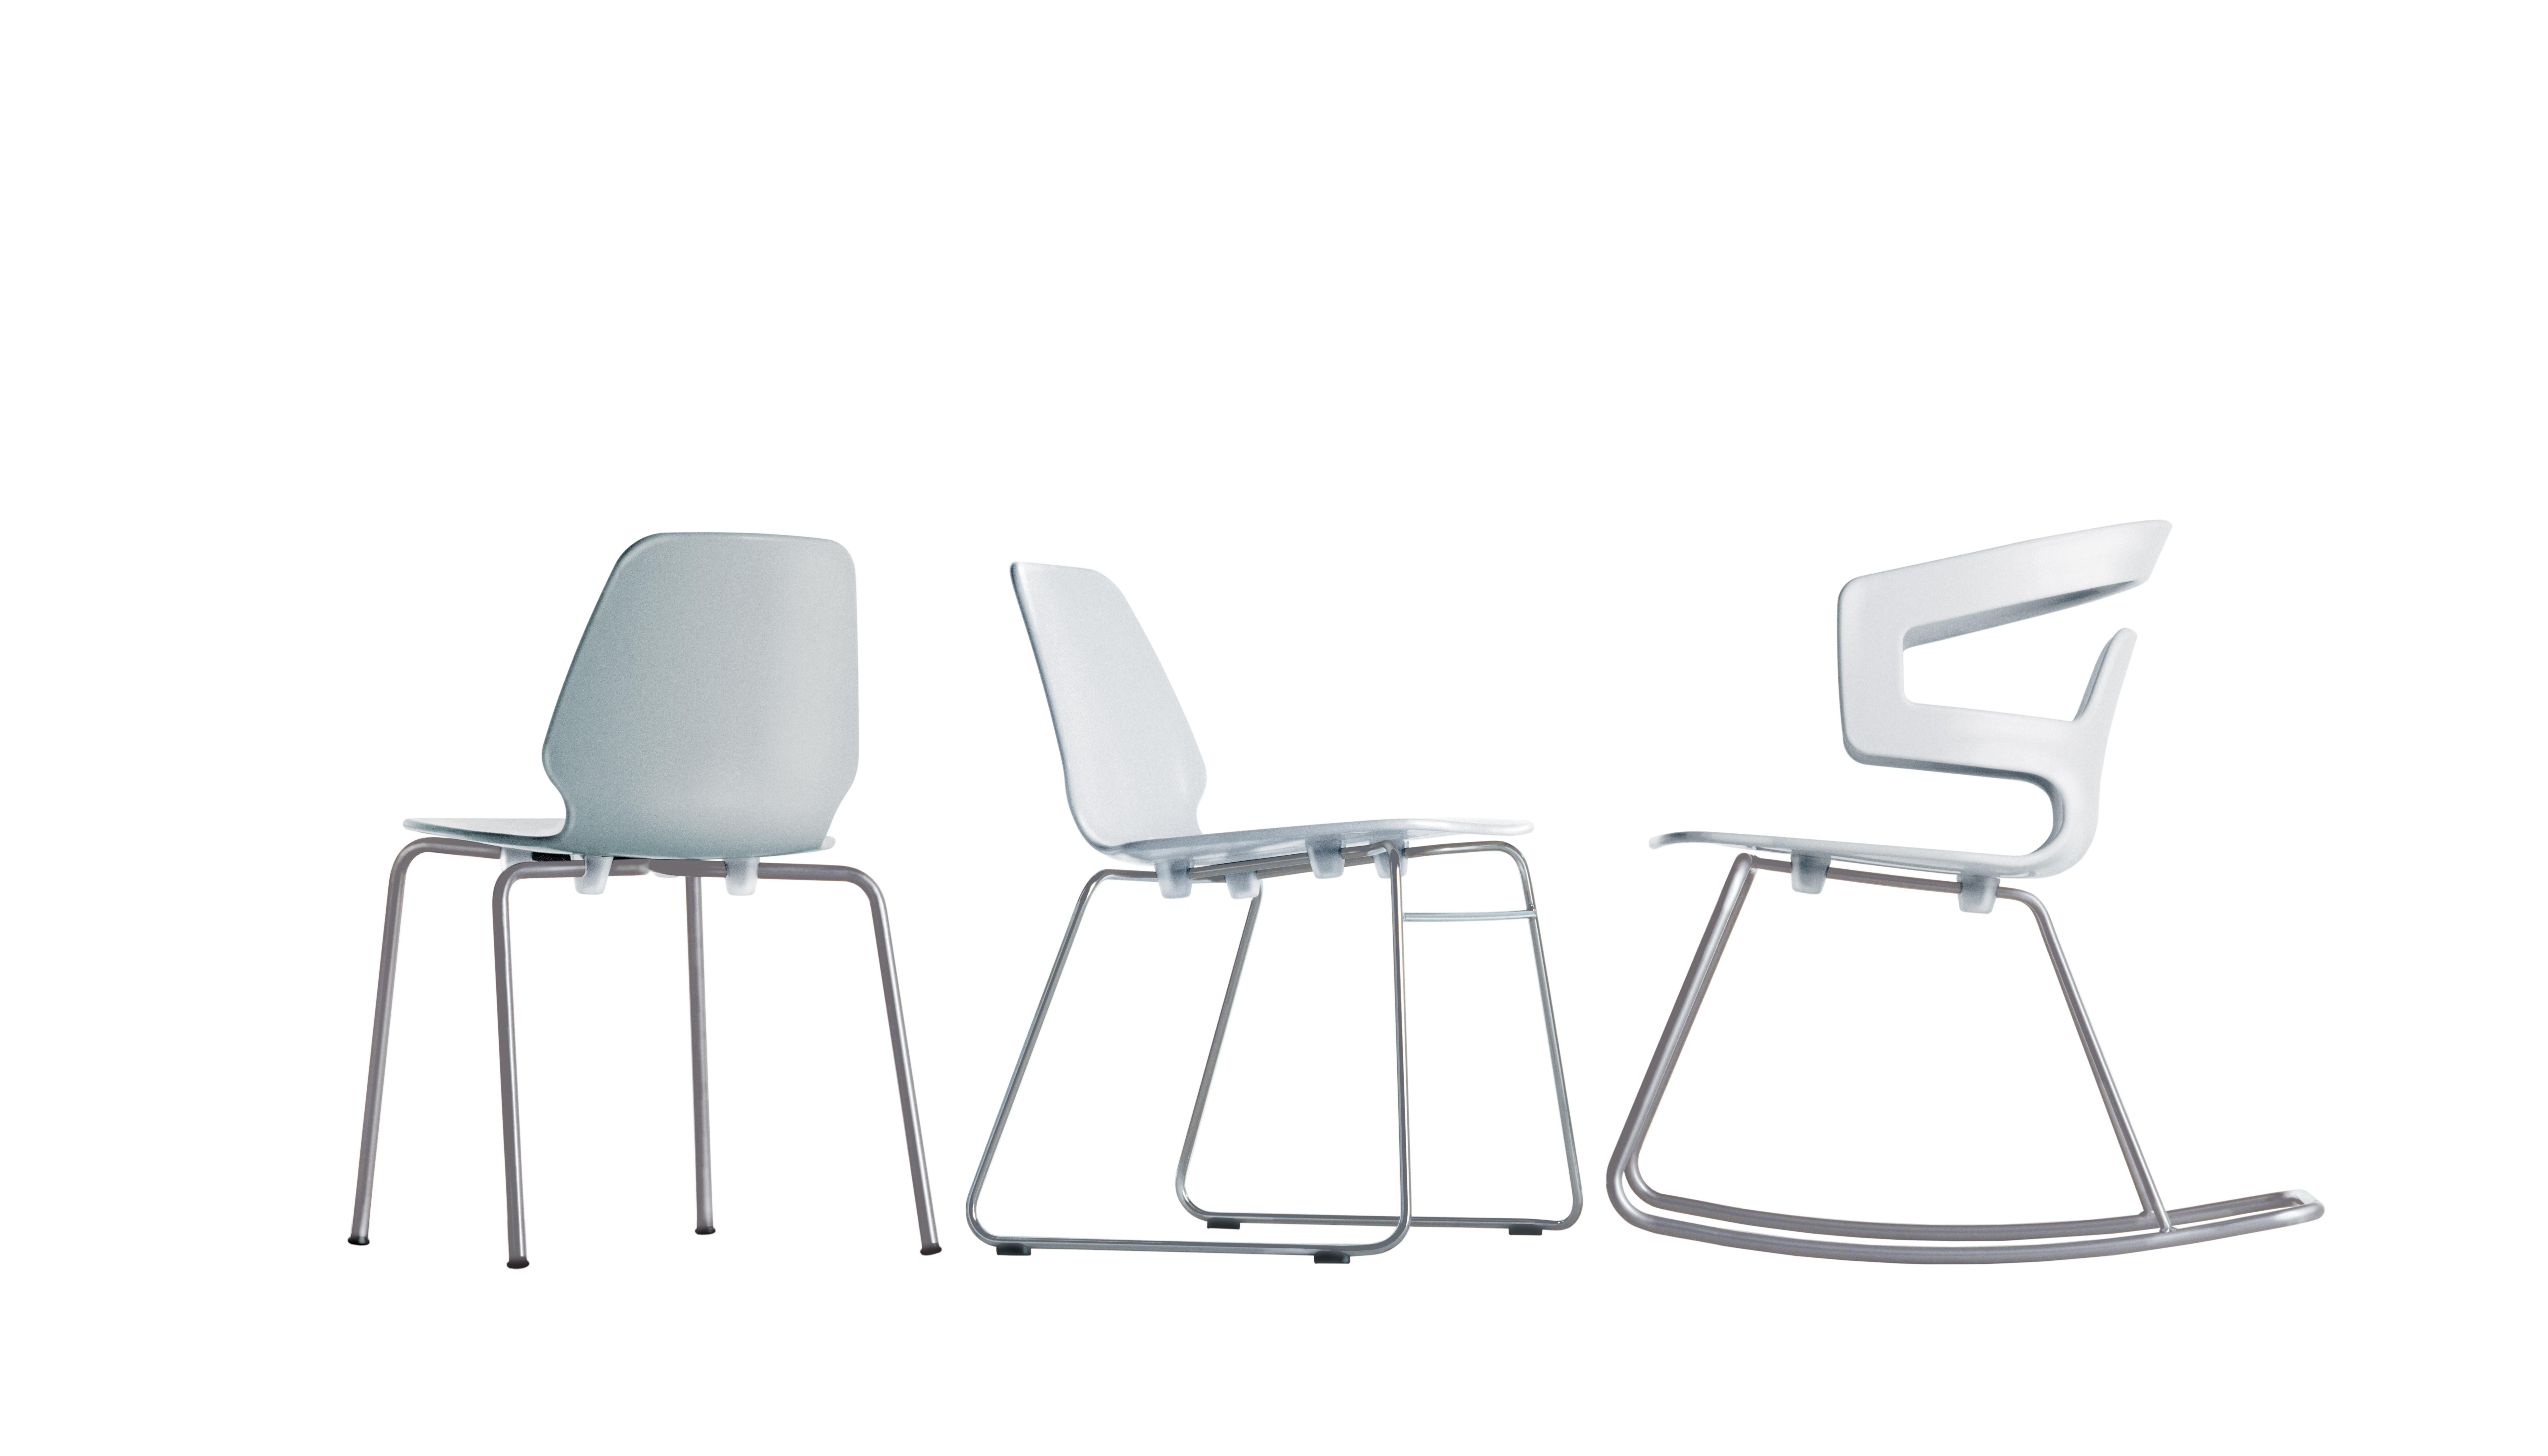 Alias 531 Selinunte Sledge Chair in White Seat and Sand Lacquered Steel Frame

Stacking chair with structure in lacquered or chromed steel; seat and back in solid plastic material.

Born in Buenos Aires in 1964, he moved to Zurich in 1977, where in